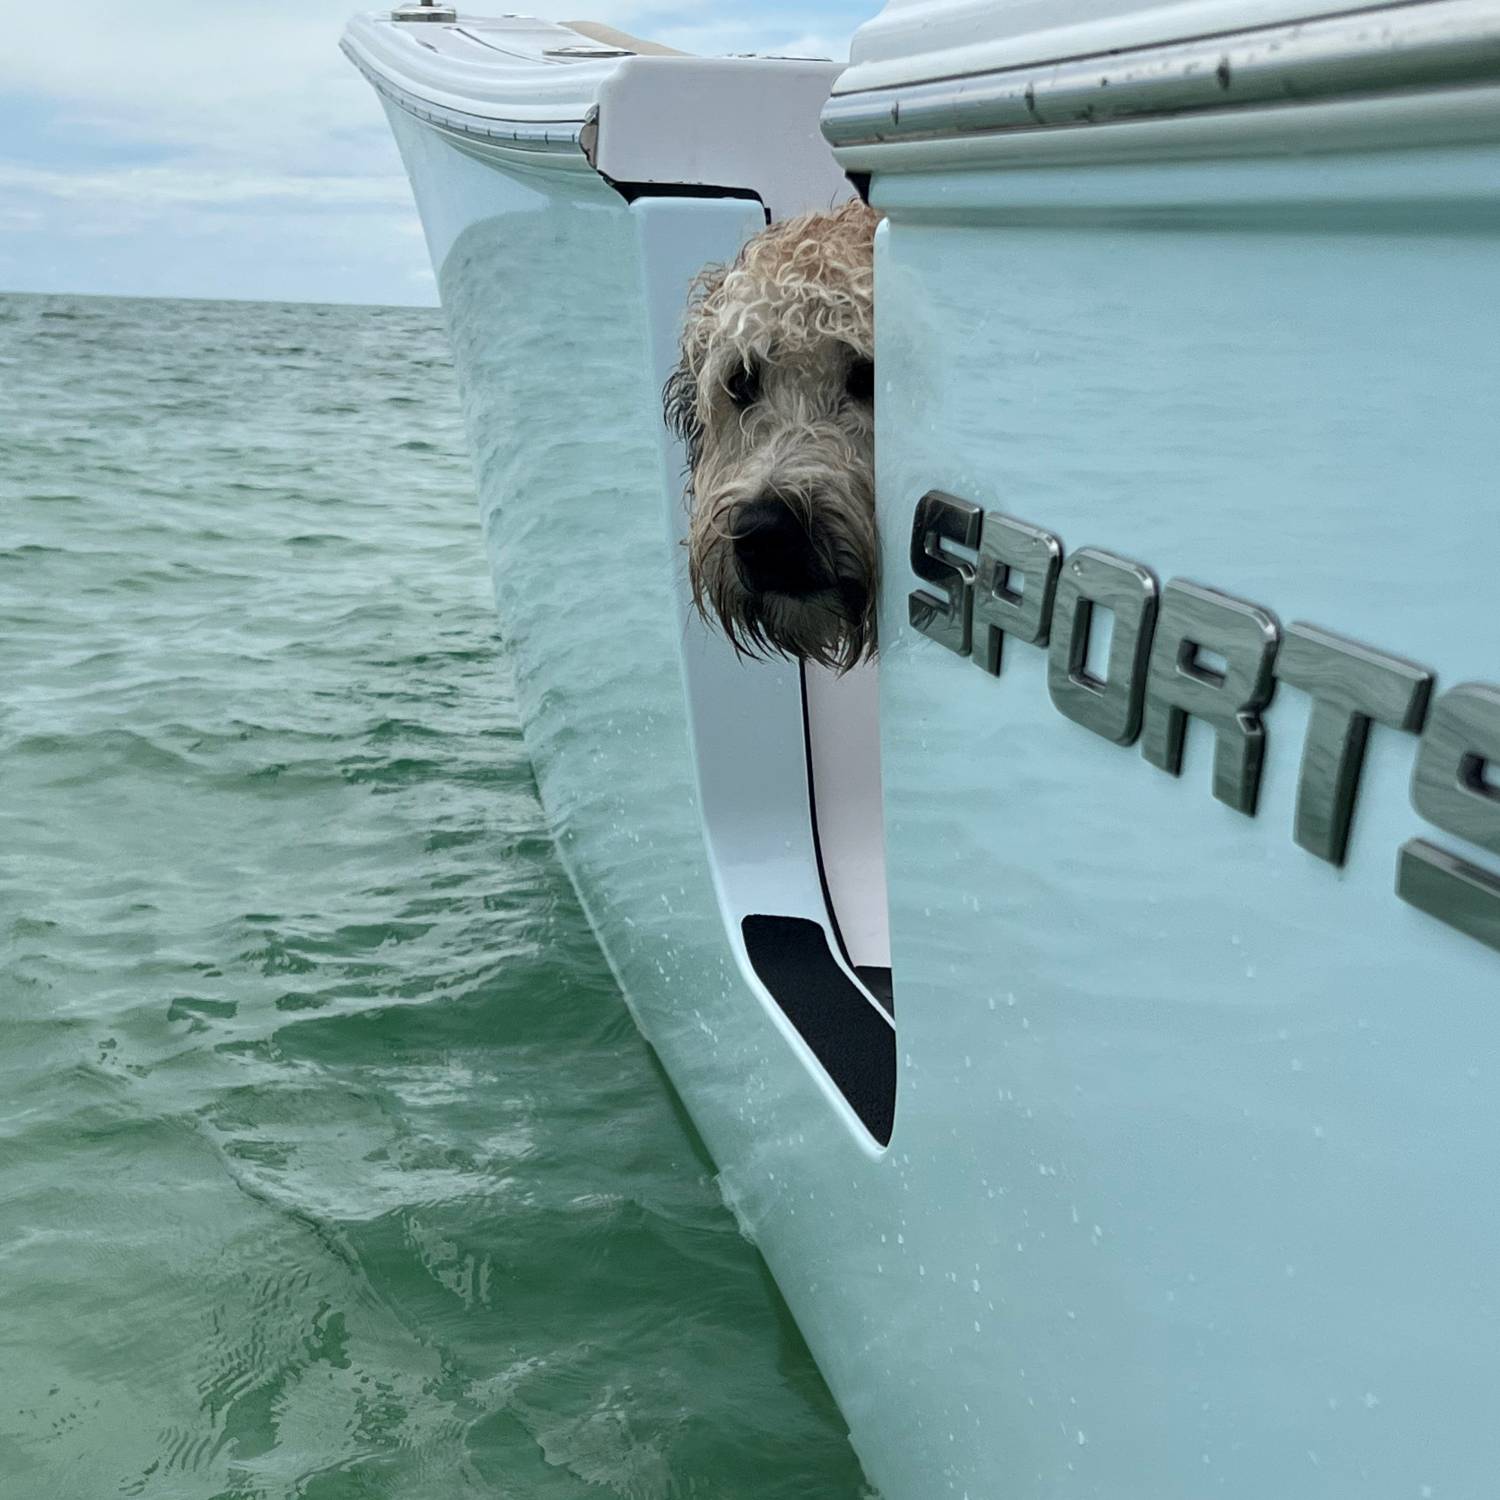 Title: Dog coming out for a swim - On board their Sportsman Open 282TE Center Console - Location: Tampa, FL. Participating in the Photo Contest #SportsmanFebruary2023